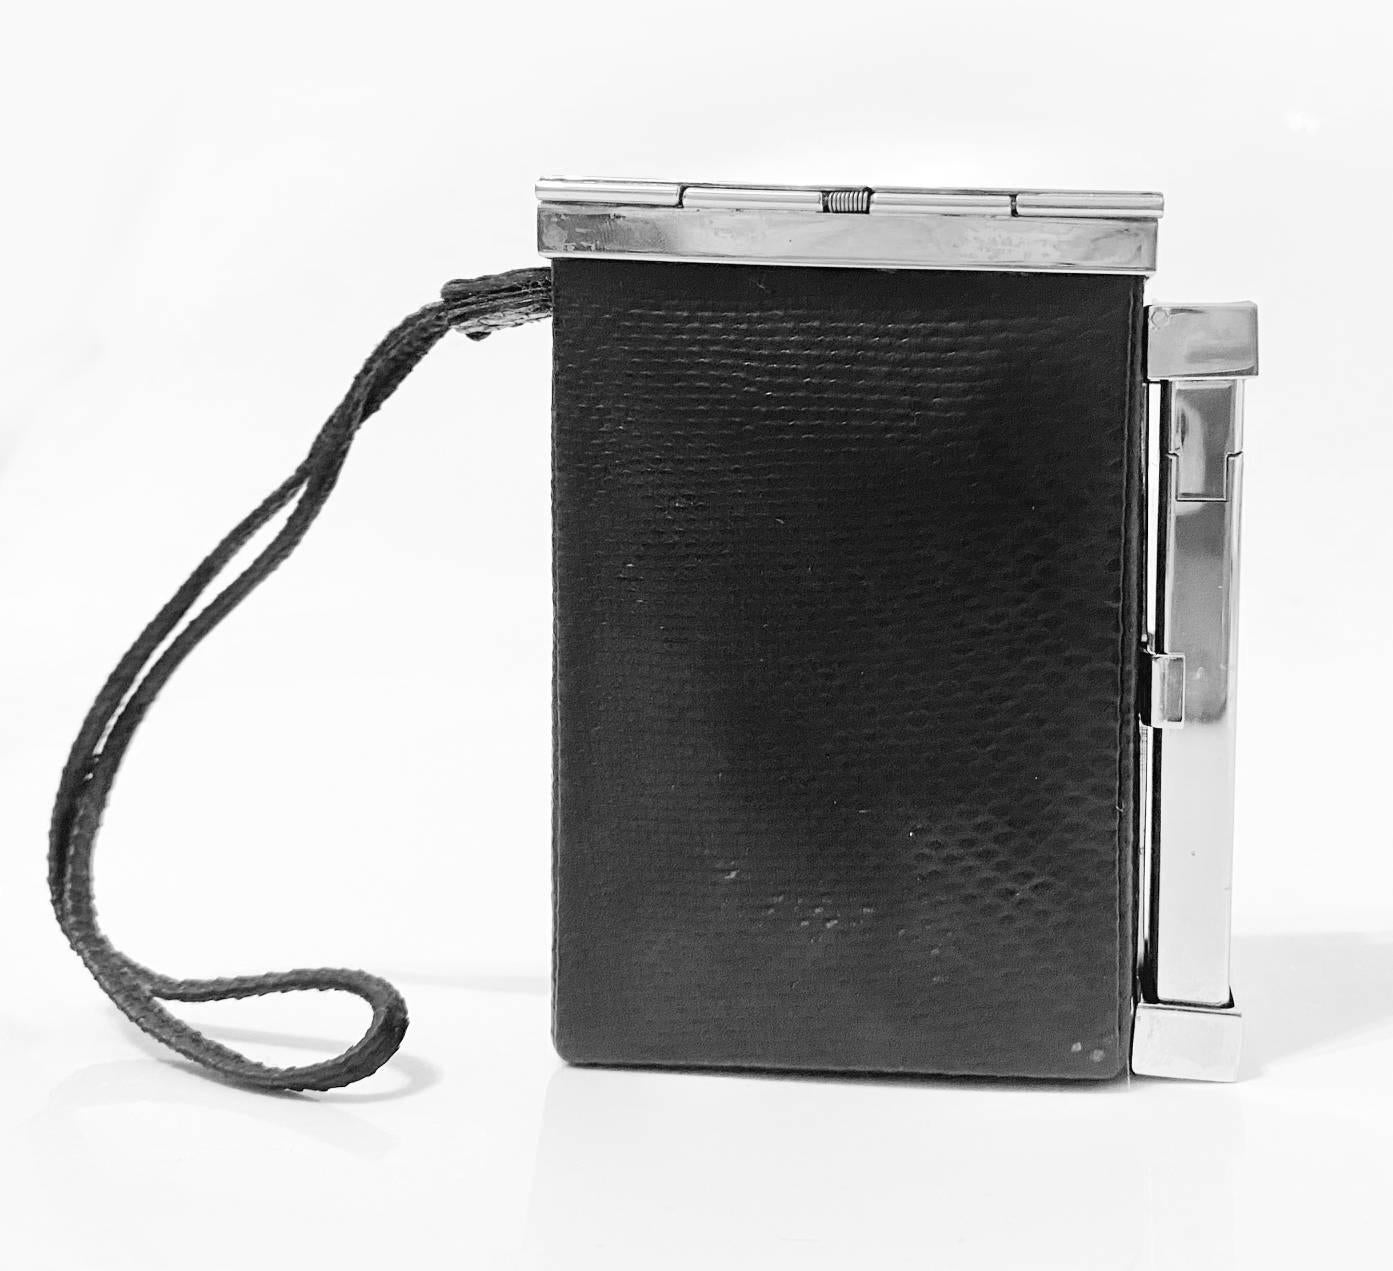 Amazing vintage smoking box and purse from Yves Saint Laurent designed by Tom Ford in 2001. Silver tone metal ware, black shiny fabric, clutch closure with logo details, fully working  lighter with signature on, black fabric string. 

Condition: